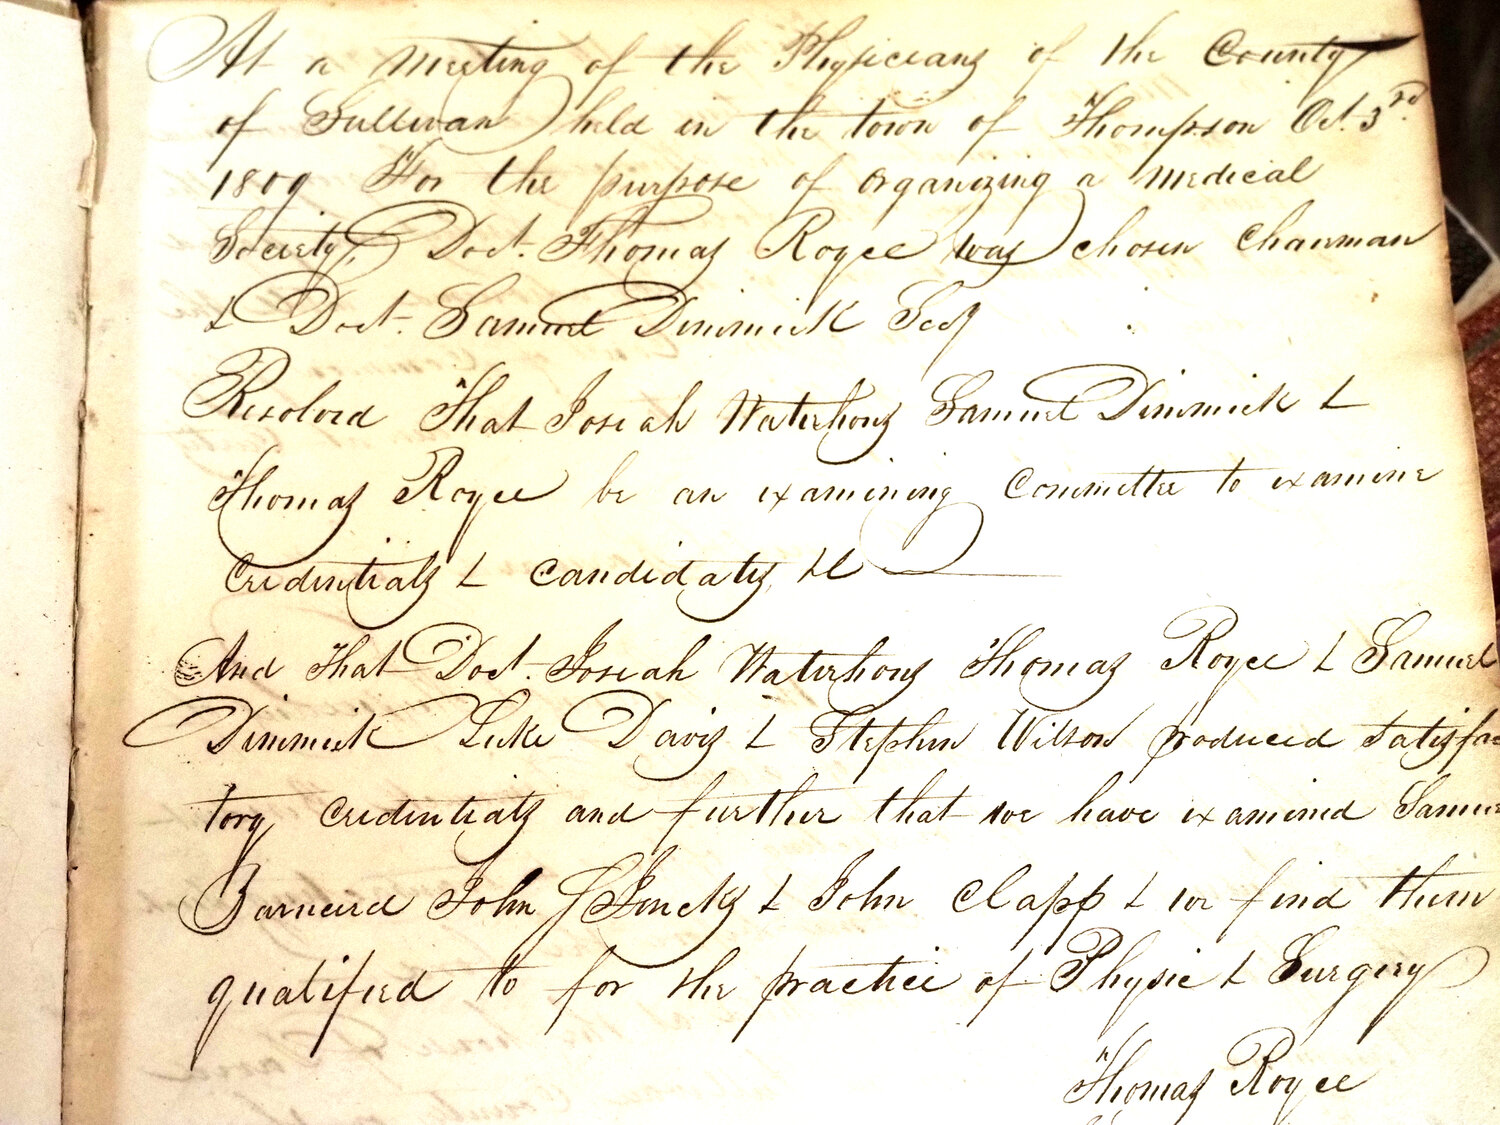 The opening of the first minutes states: “At a meeting of the Physicians of the County of Sullivan held in the town of Thompson Oct. 3rd 1809 for the purpose of organizing a medical society...”